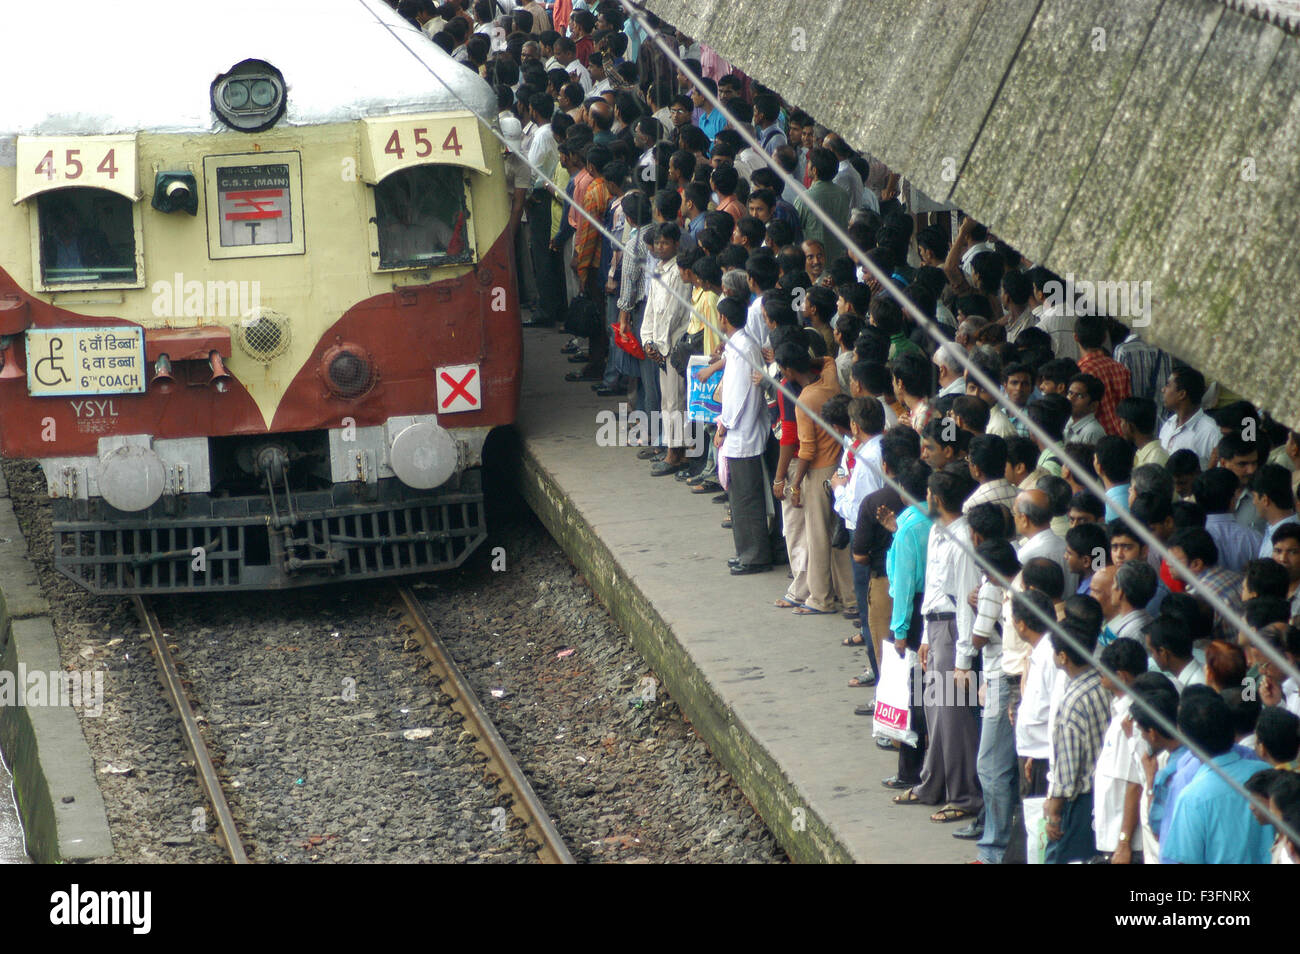 Commuters try to get into crowded local train during peak hour at Ghatkopar Railway Station in Bombay Mumbai Stock Photo